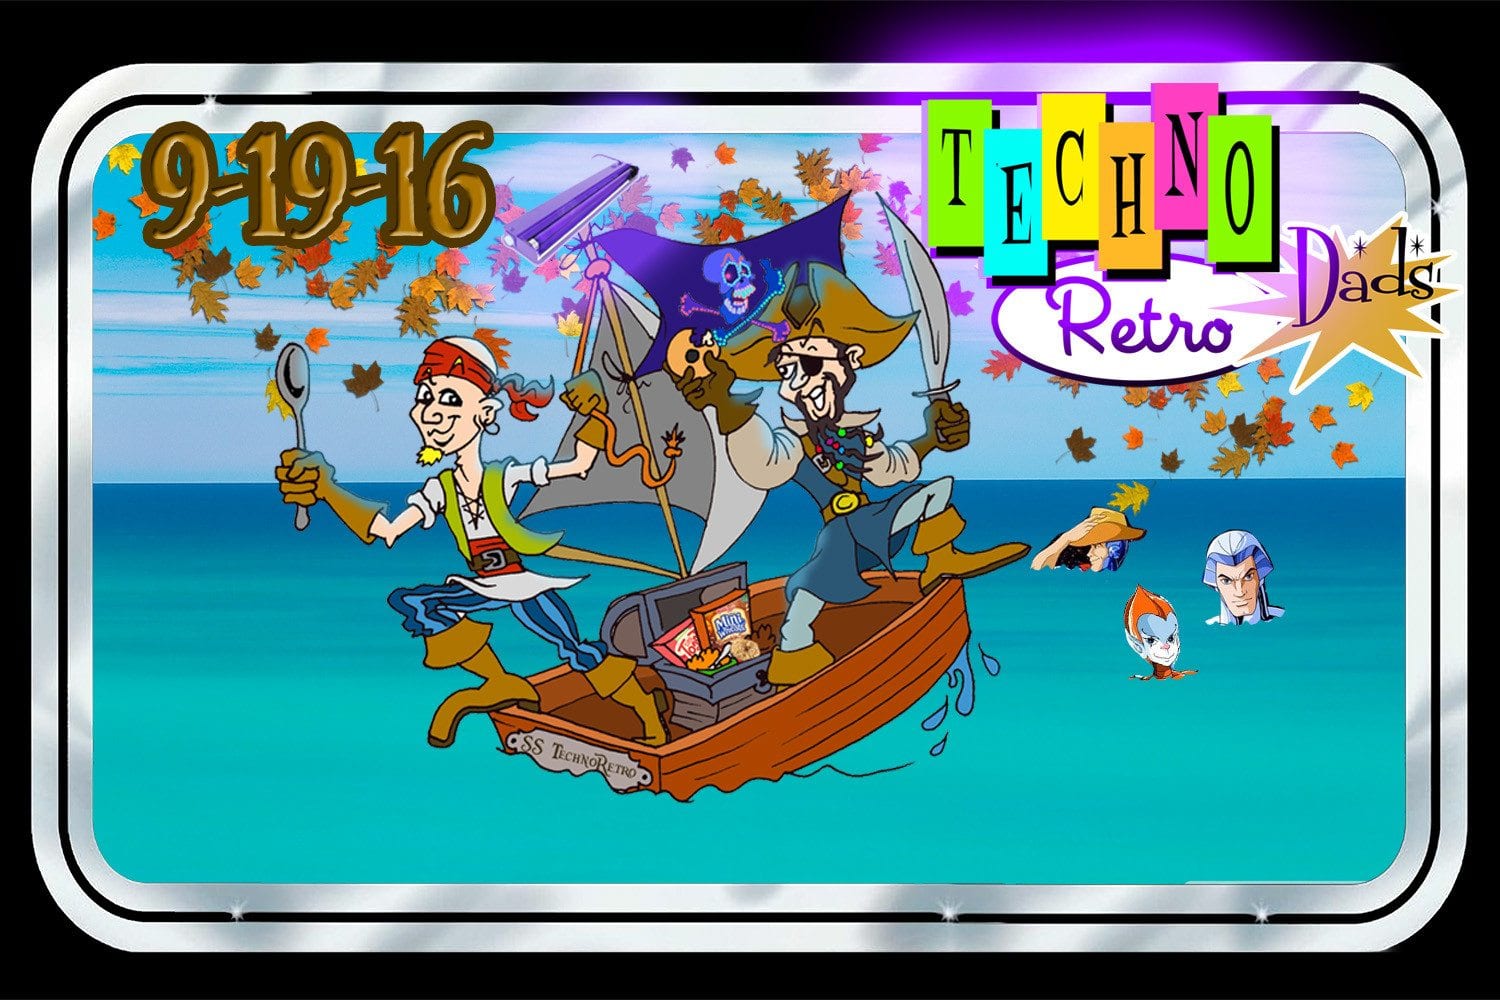 TechnoRetro Dads: Hoist the Black(light) Flag and Talk Like a Pirate Day